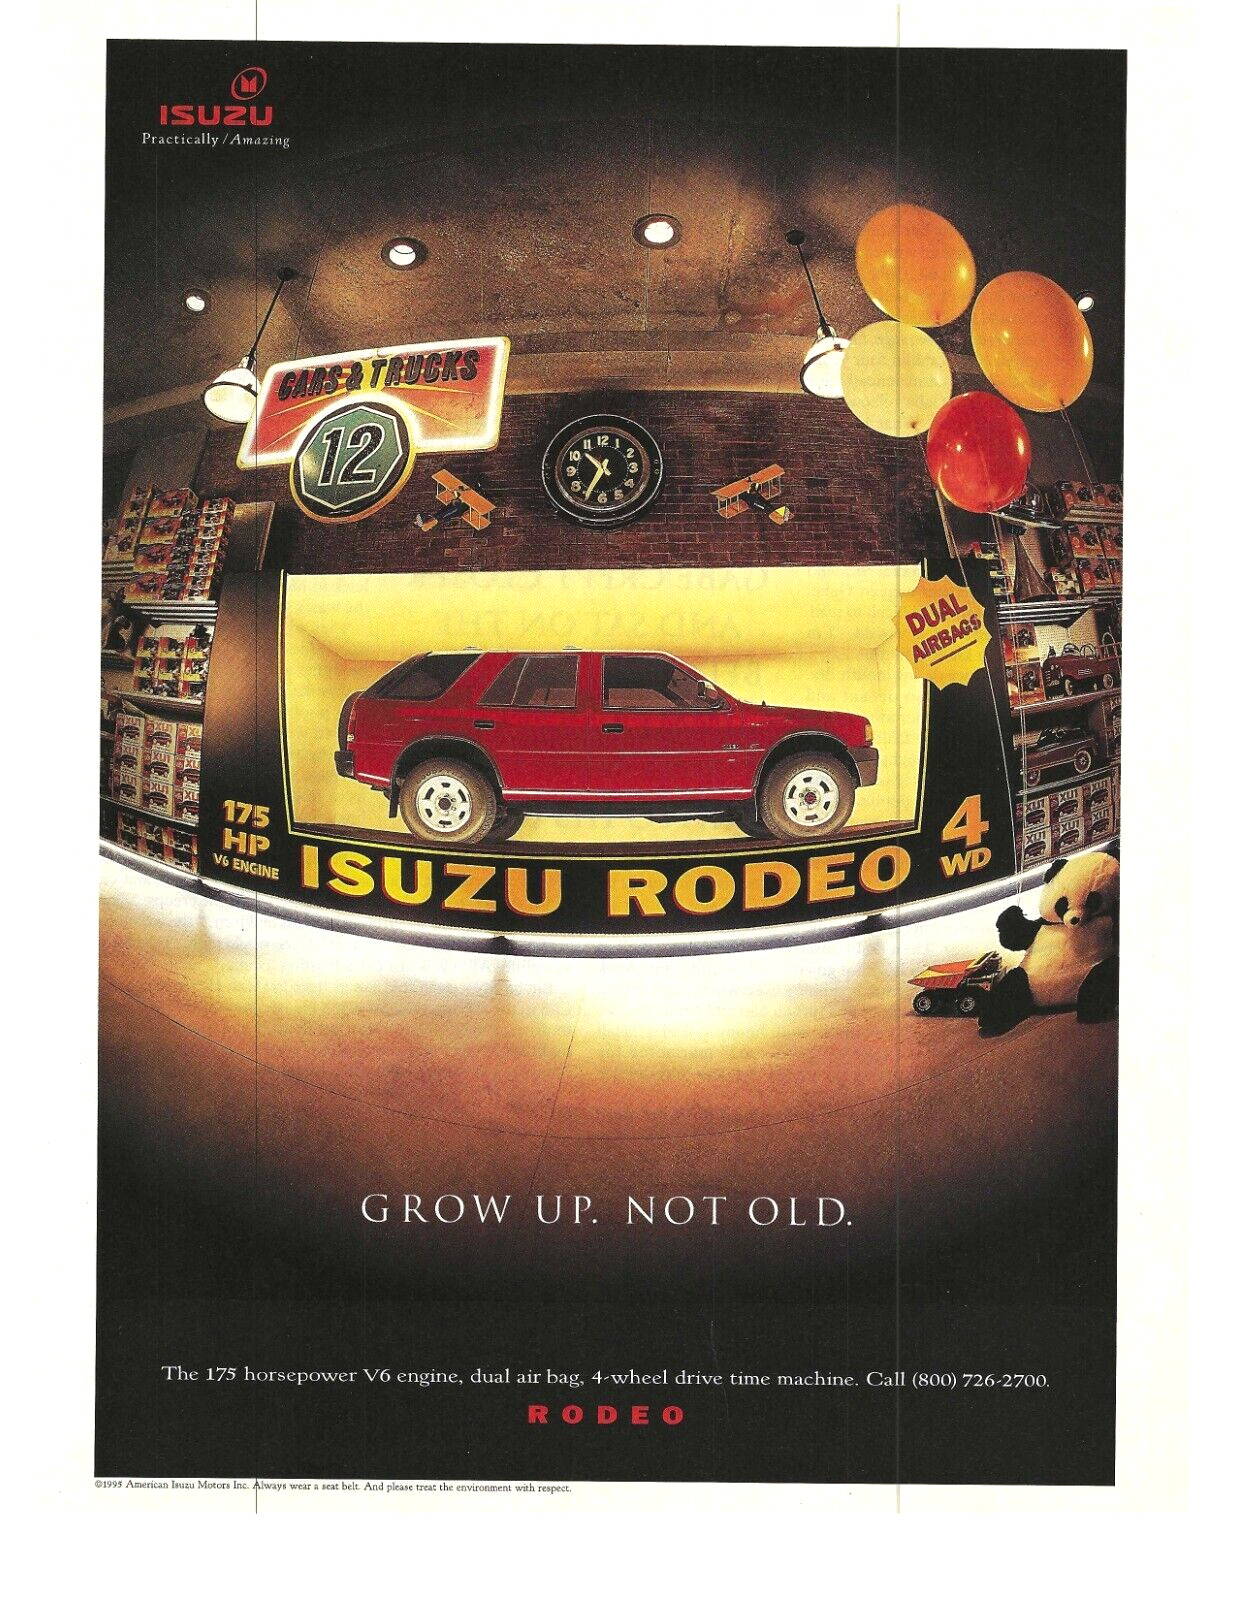 1995 Isuzu Rodeo Vintage Magazine Print Ad Grow Up Not Old Red Suv In Toy Store